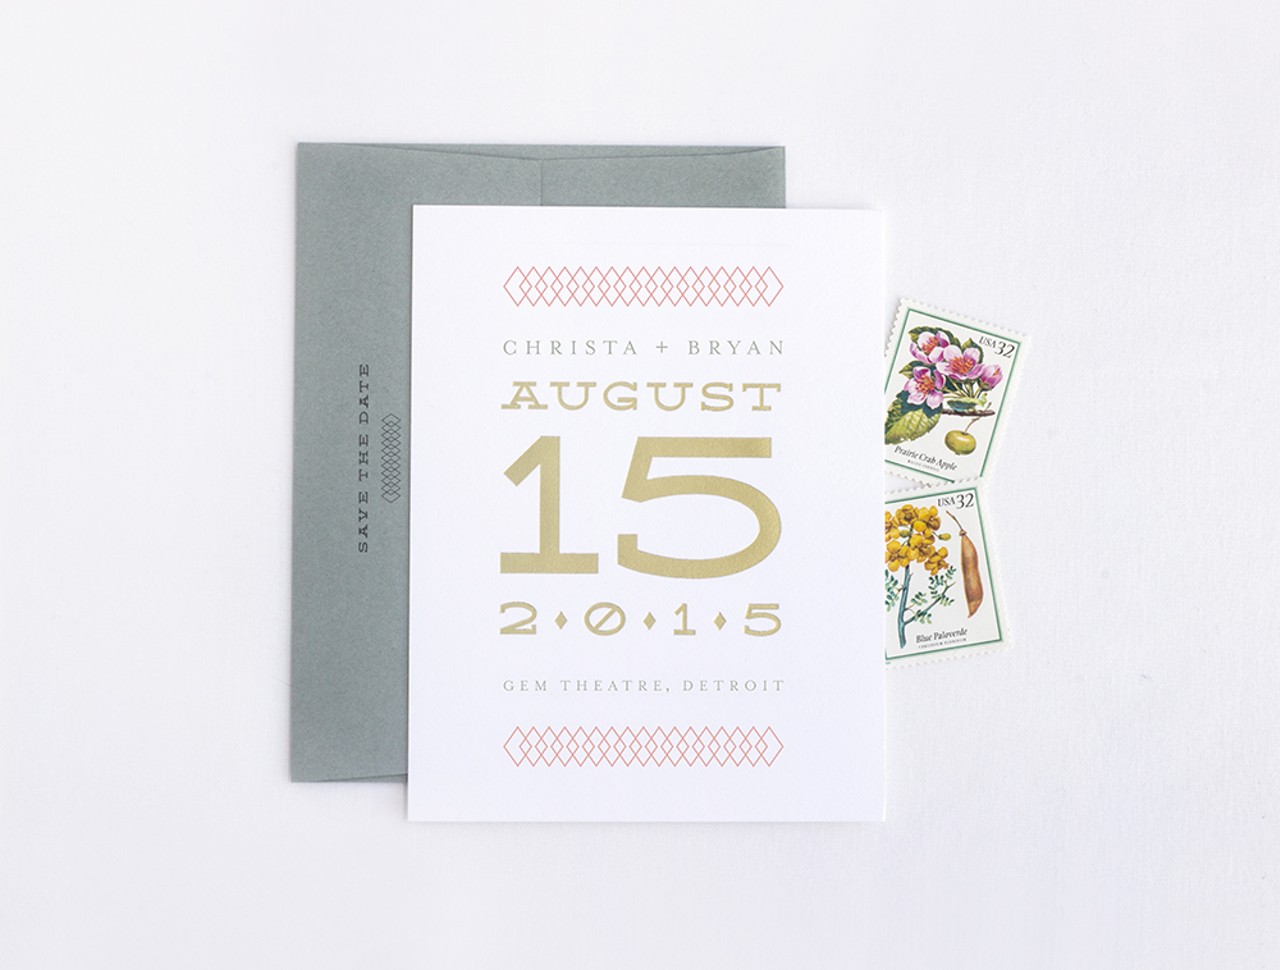 Genna Cowsert 
Often the first taste your guests will get of your wedding will be the Save the Date. Impress them with custom designs and quality paper. The options are truly endless and let's be honest, could you make this?